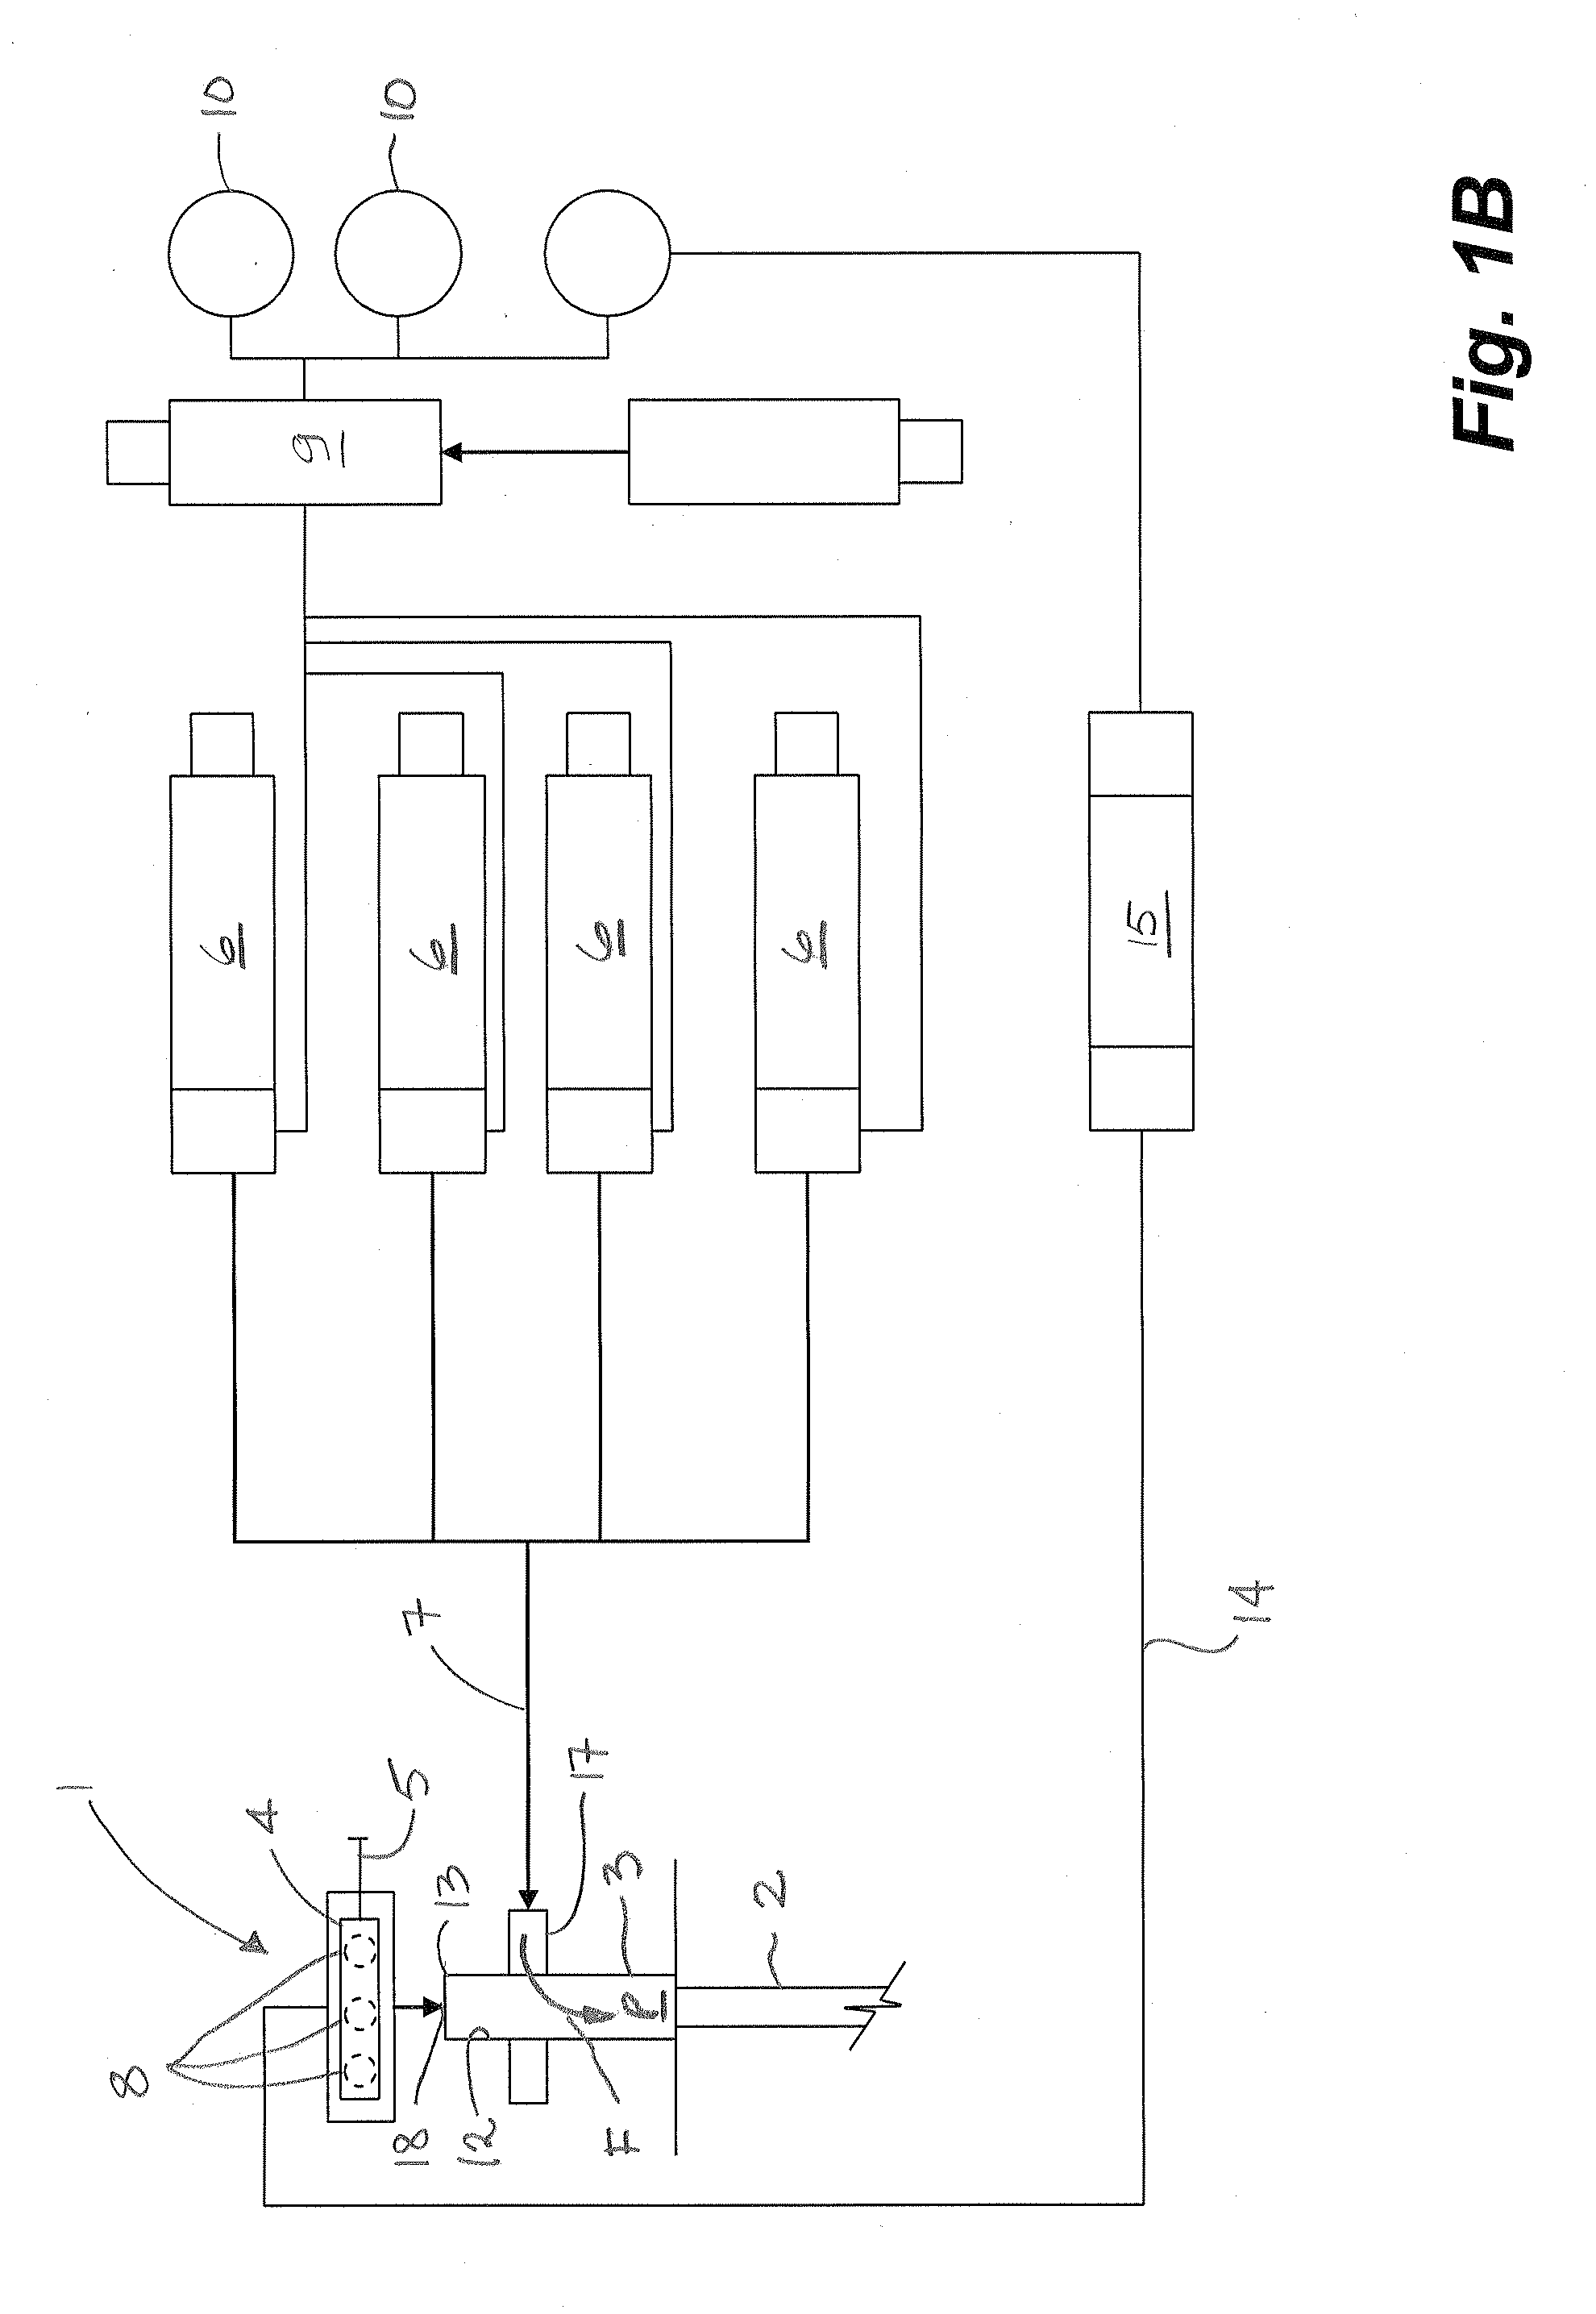 Ball injecting apparatus for wellbore operations